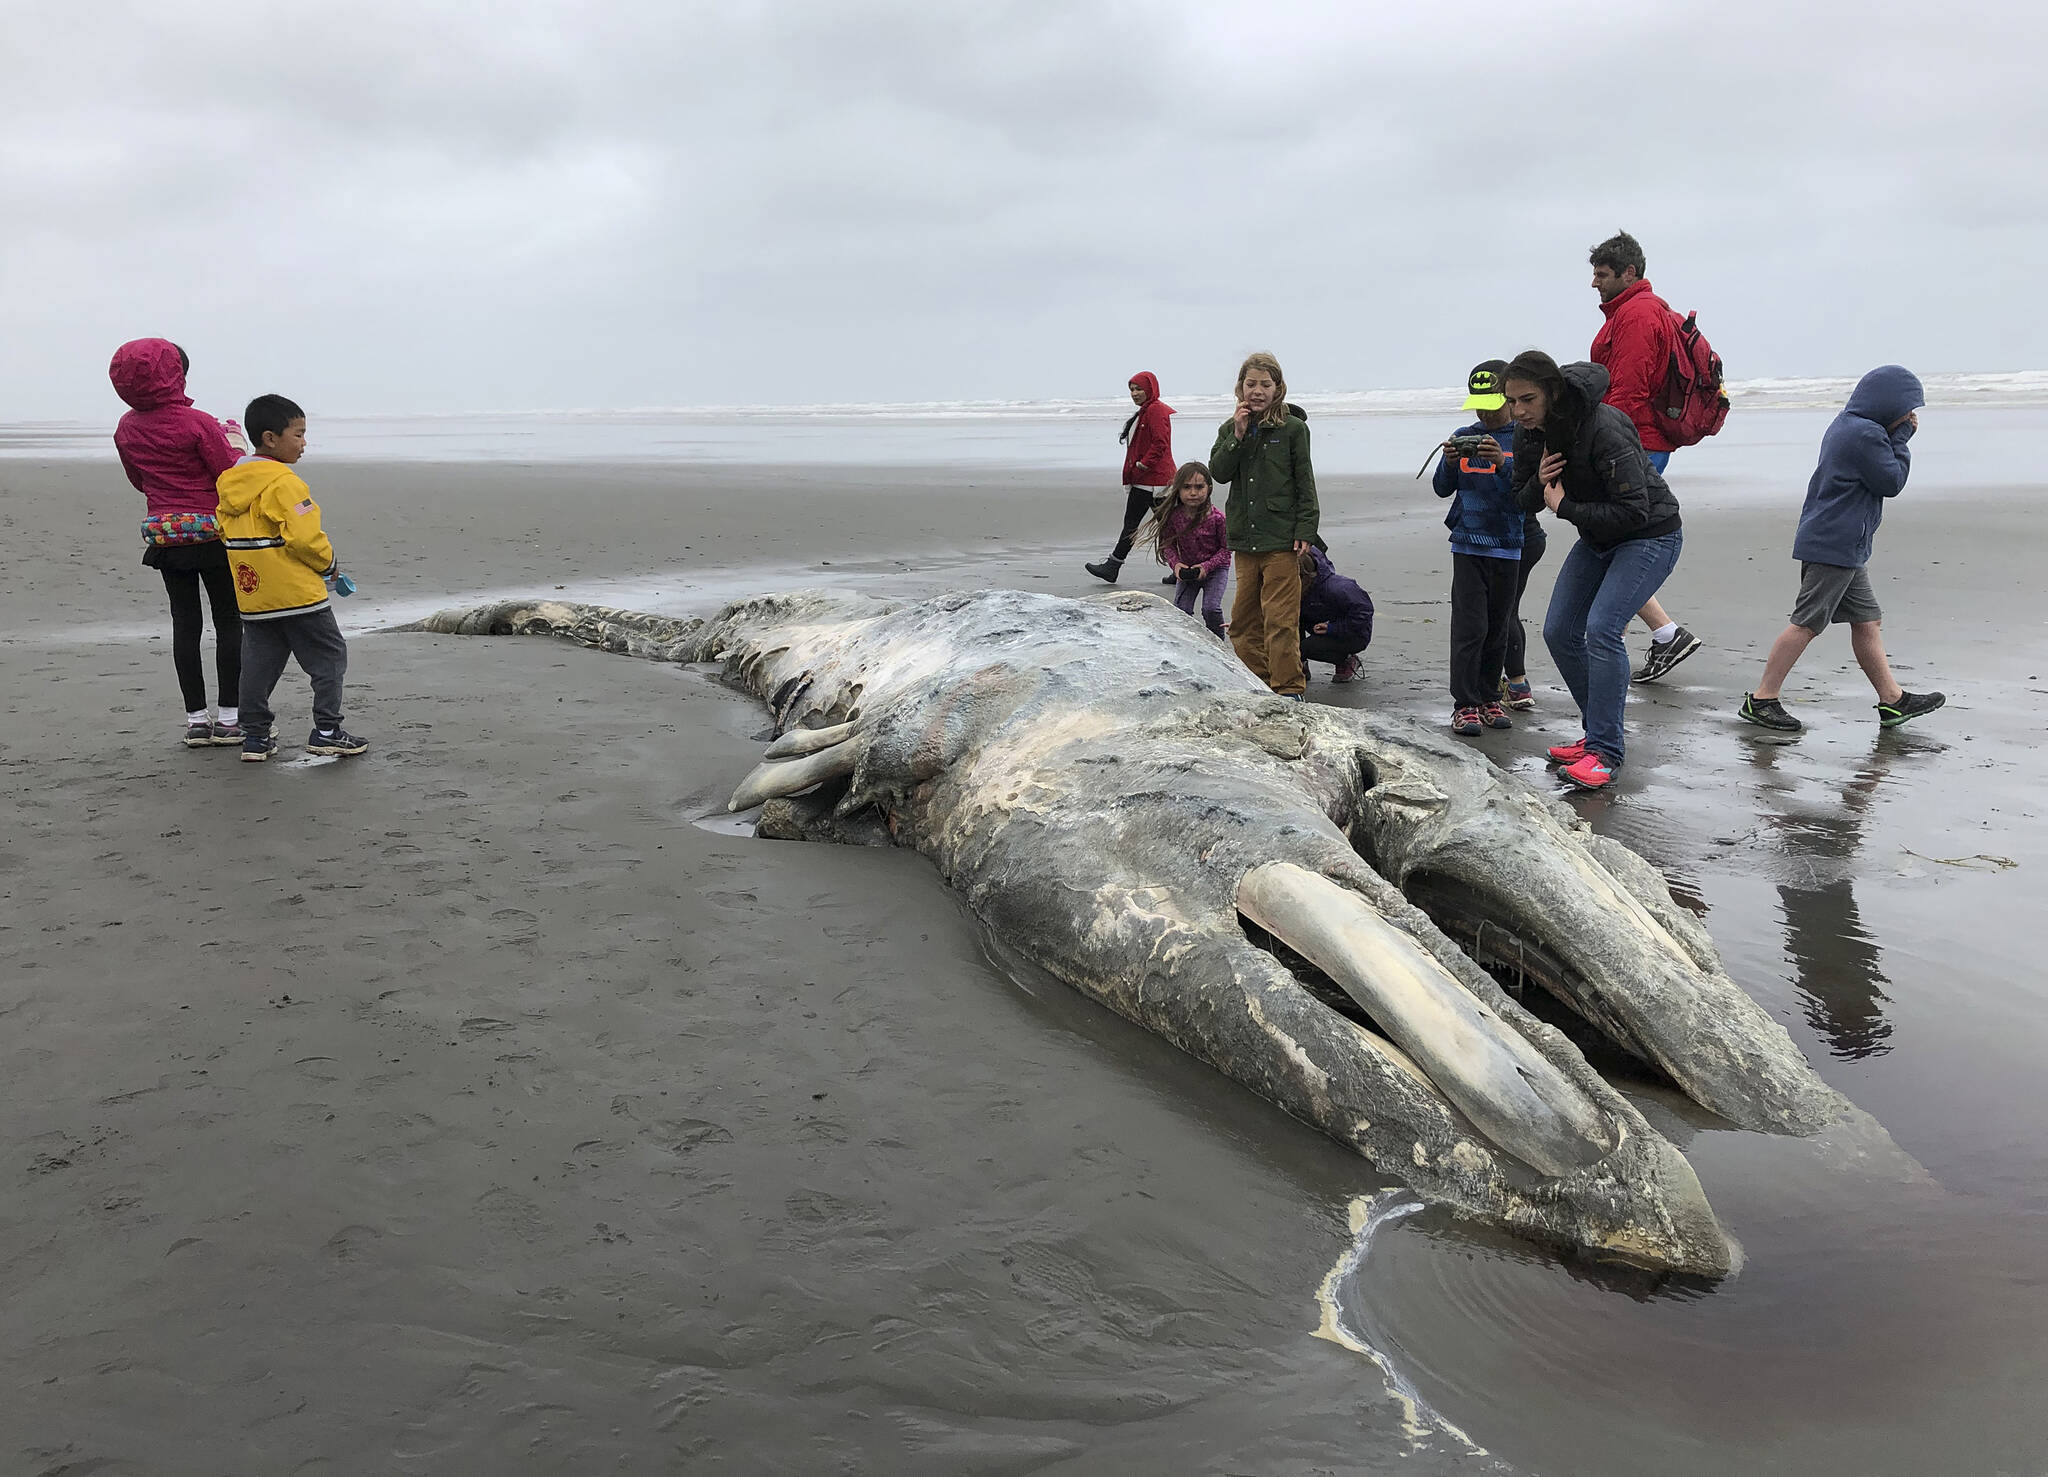 In this May 24, 2019, photo, teachers and students from Northwest Montessori School in Seattle examine the carcass of a gray whale after it washed up on the coast of Washington's Olympic Peninsula, just north of Kalaloch Campground in Olympic National Park. U.S. researchers say the number of gray whales off western North America has continued to fall over the last two years, a decline that resembles previous population swings over the past several decades. According to an assessment by NOAA Fisheries released Friday, Oct. 7, 2022, the most recent count put the population at 16,650 whales — down 38% from its peak in 2015-16. (AP Photo / Gene Johnson)